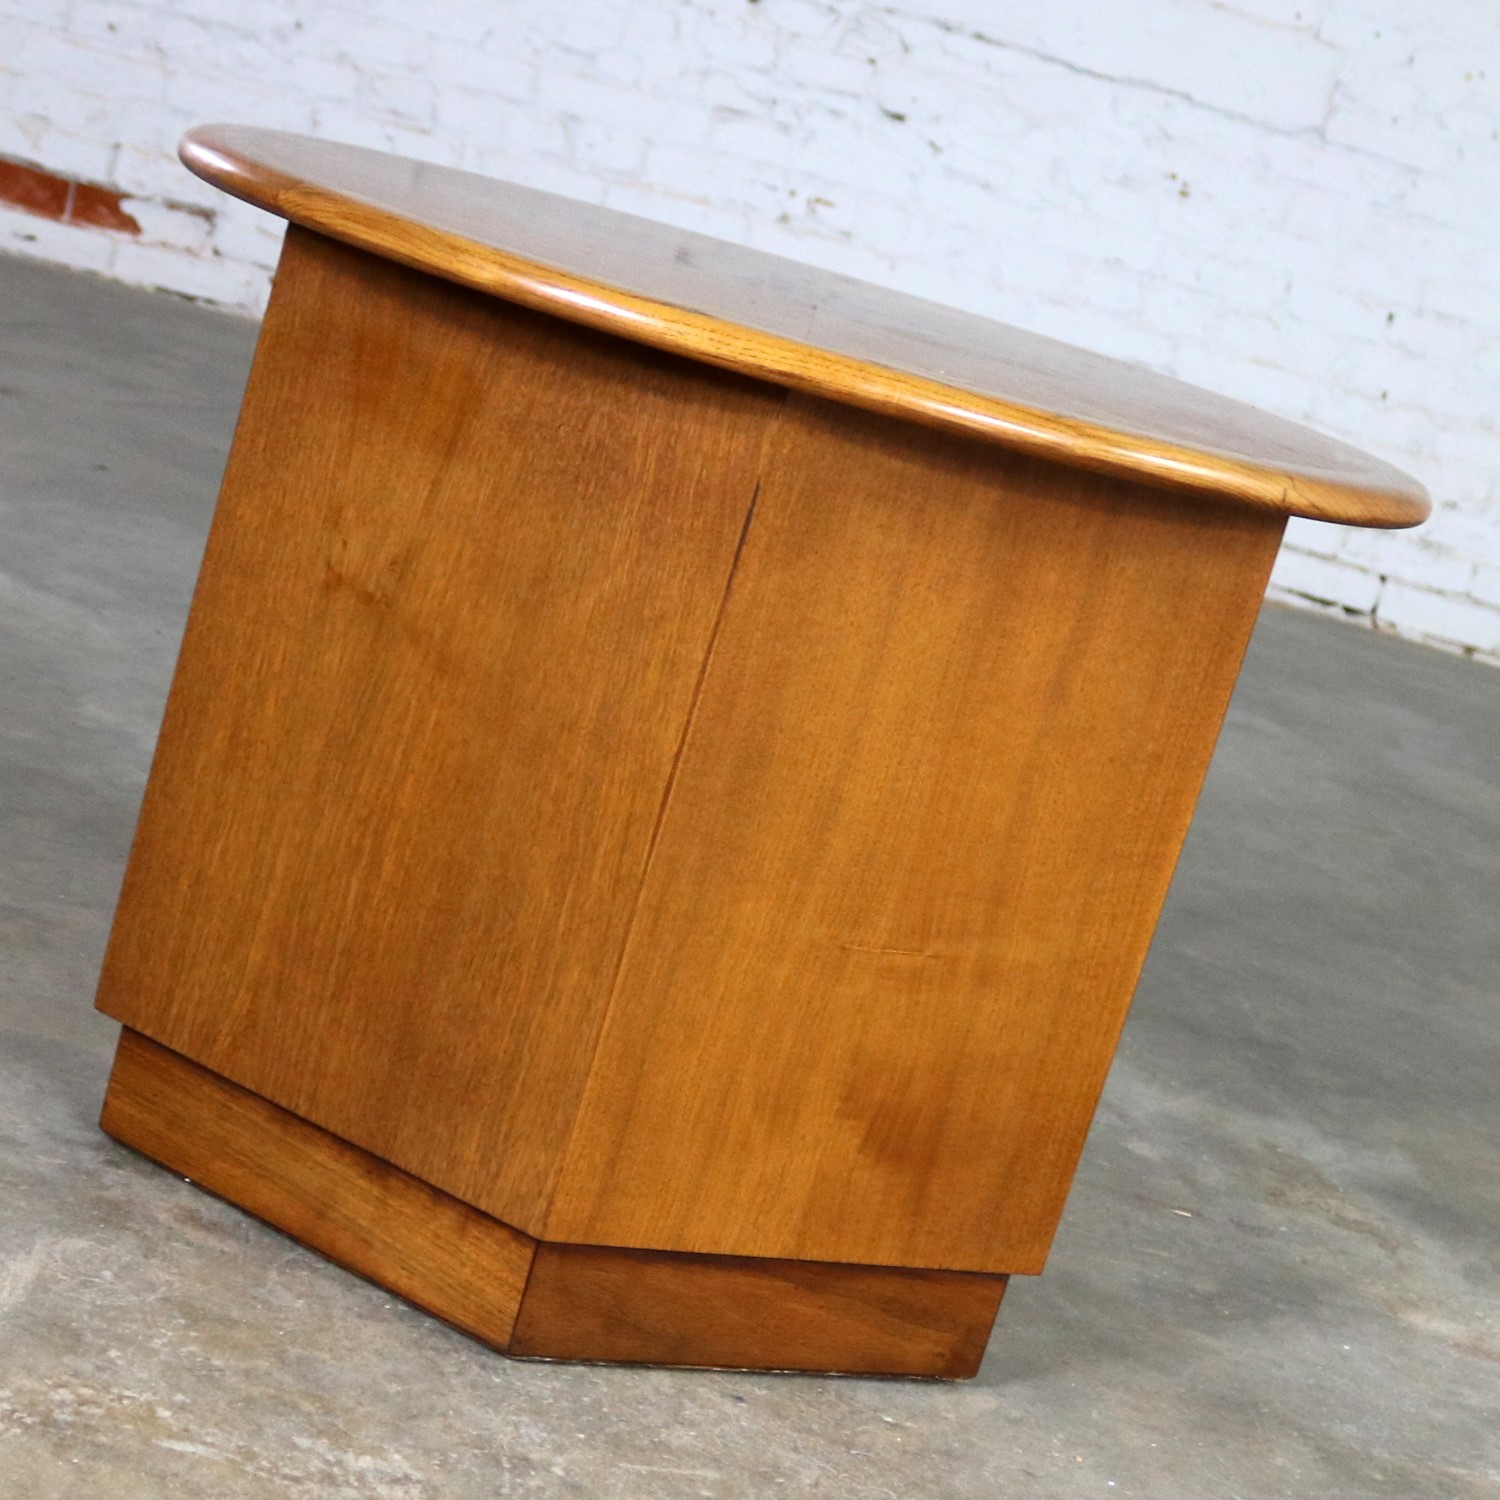 Lane Acclaim Dovetail End Table with Round Top and Hexagon Cabinet Base by Andre Bus